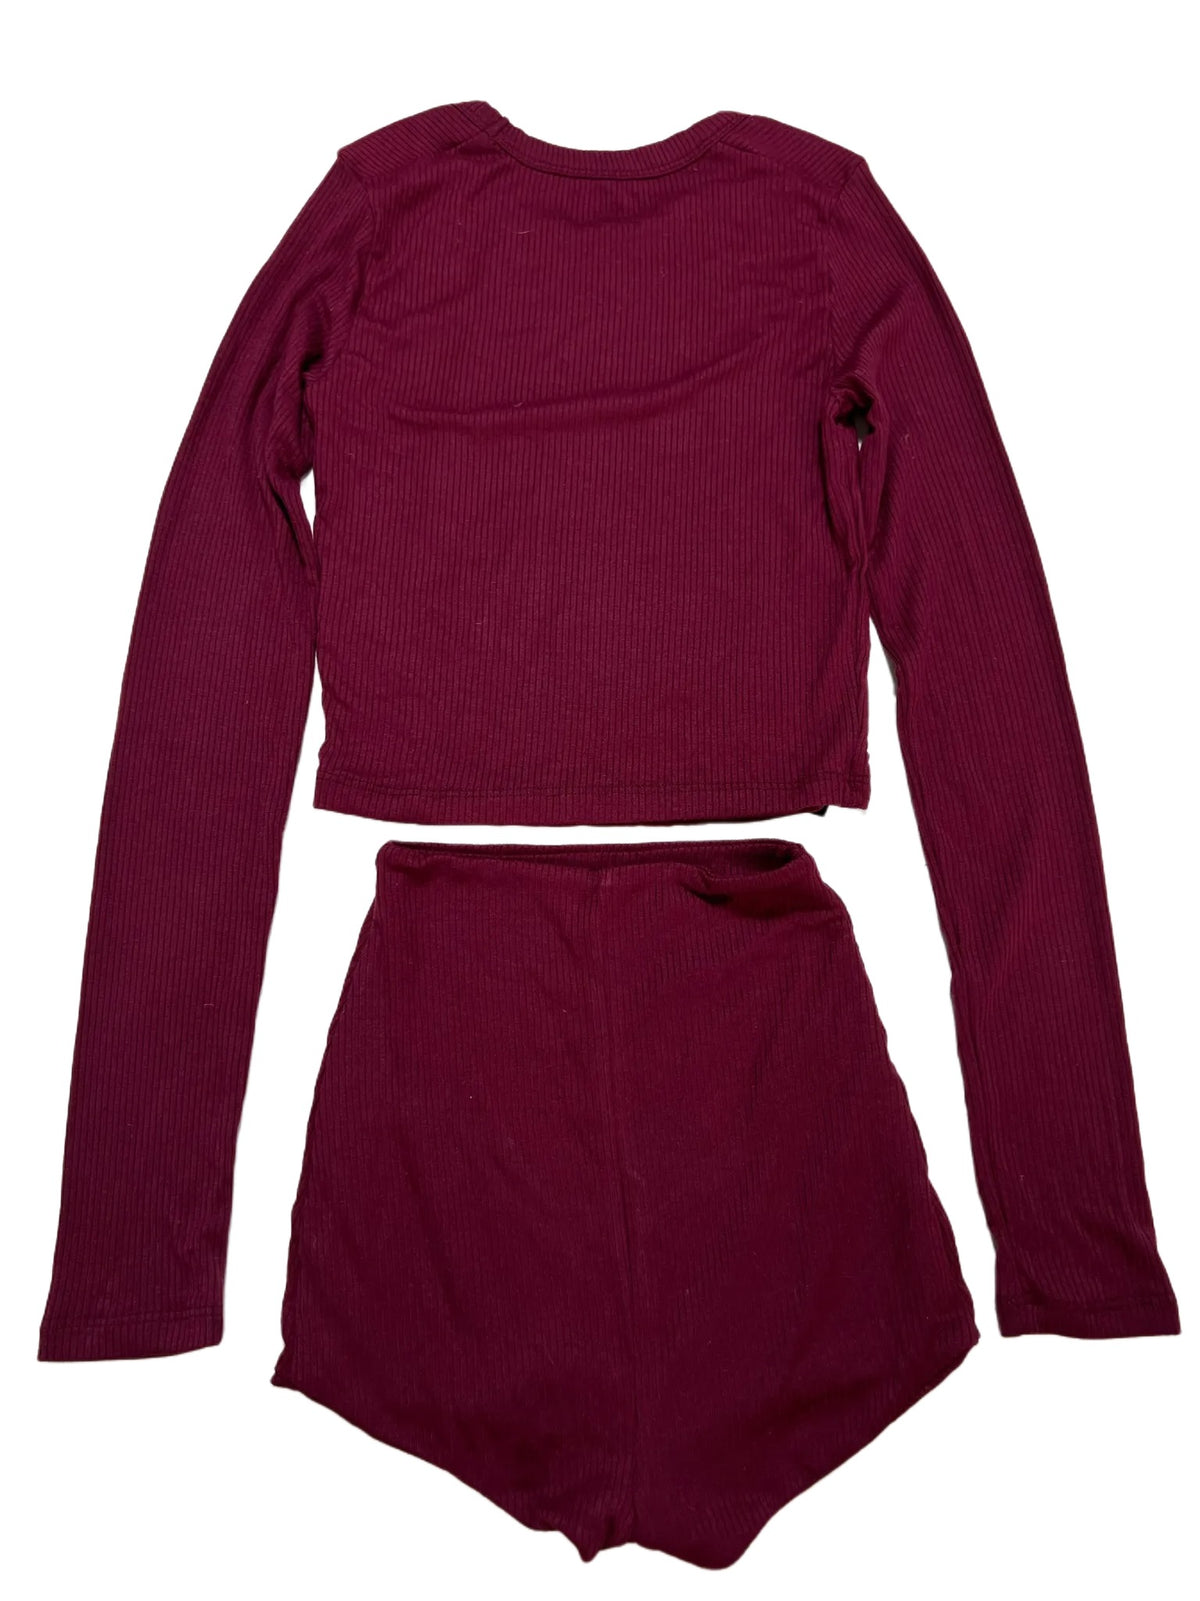 Skatie- Maroon "Erica" Matching Set NEW WITH TAGS